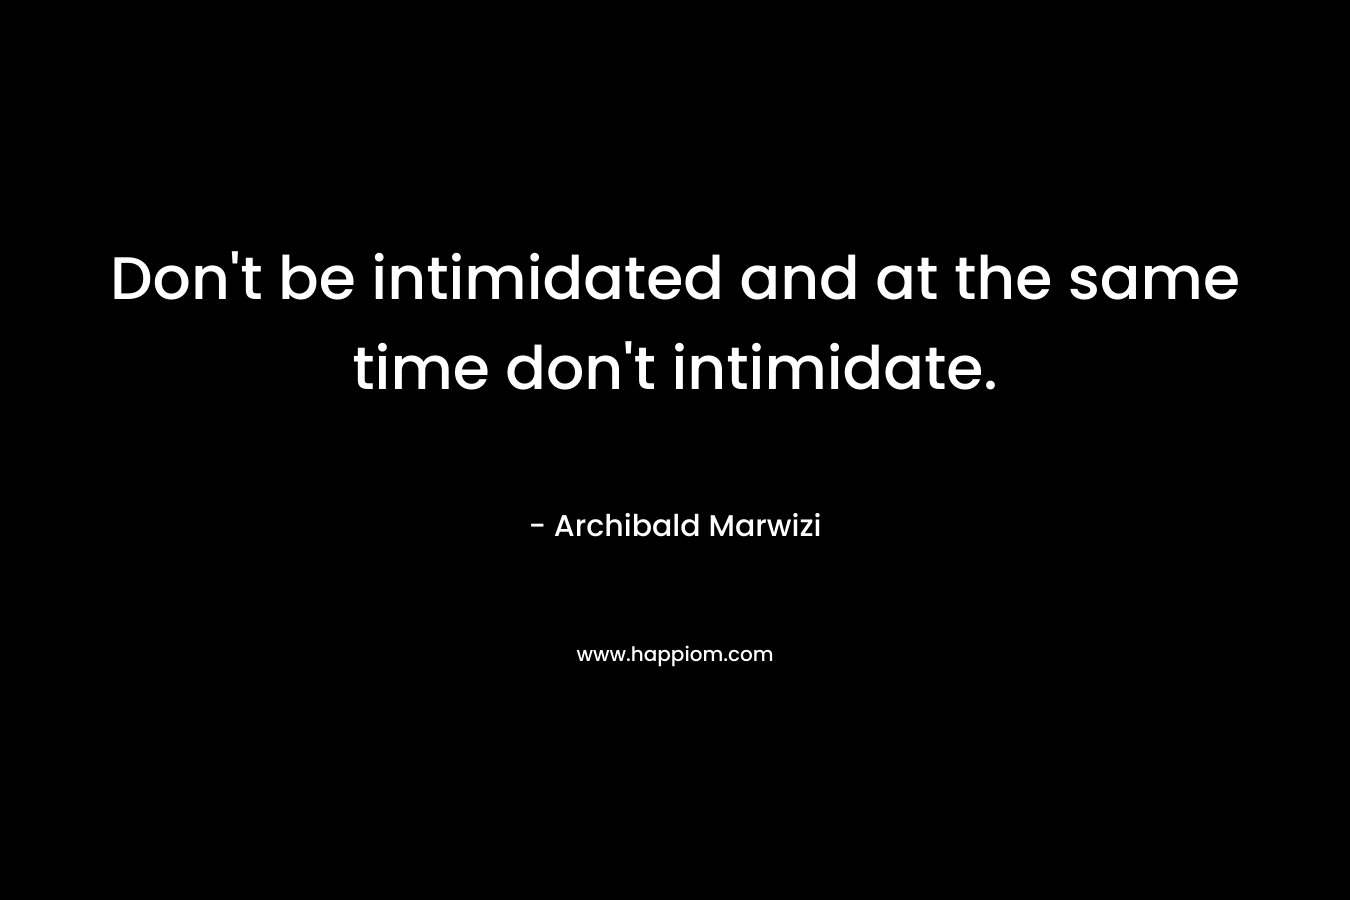 Don't be intimidated and at the same time don't intimidate.